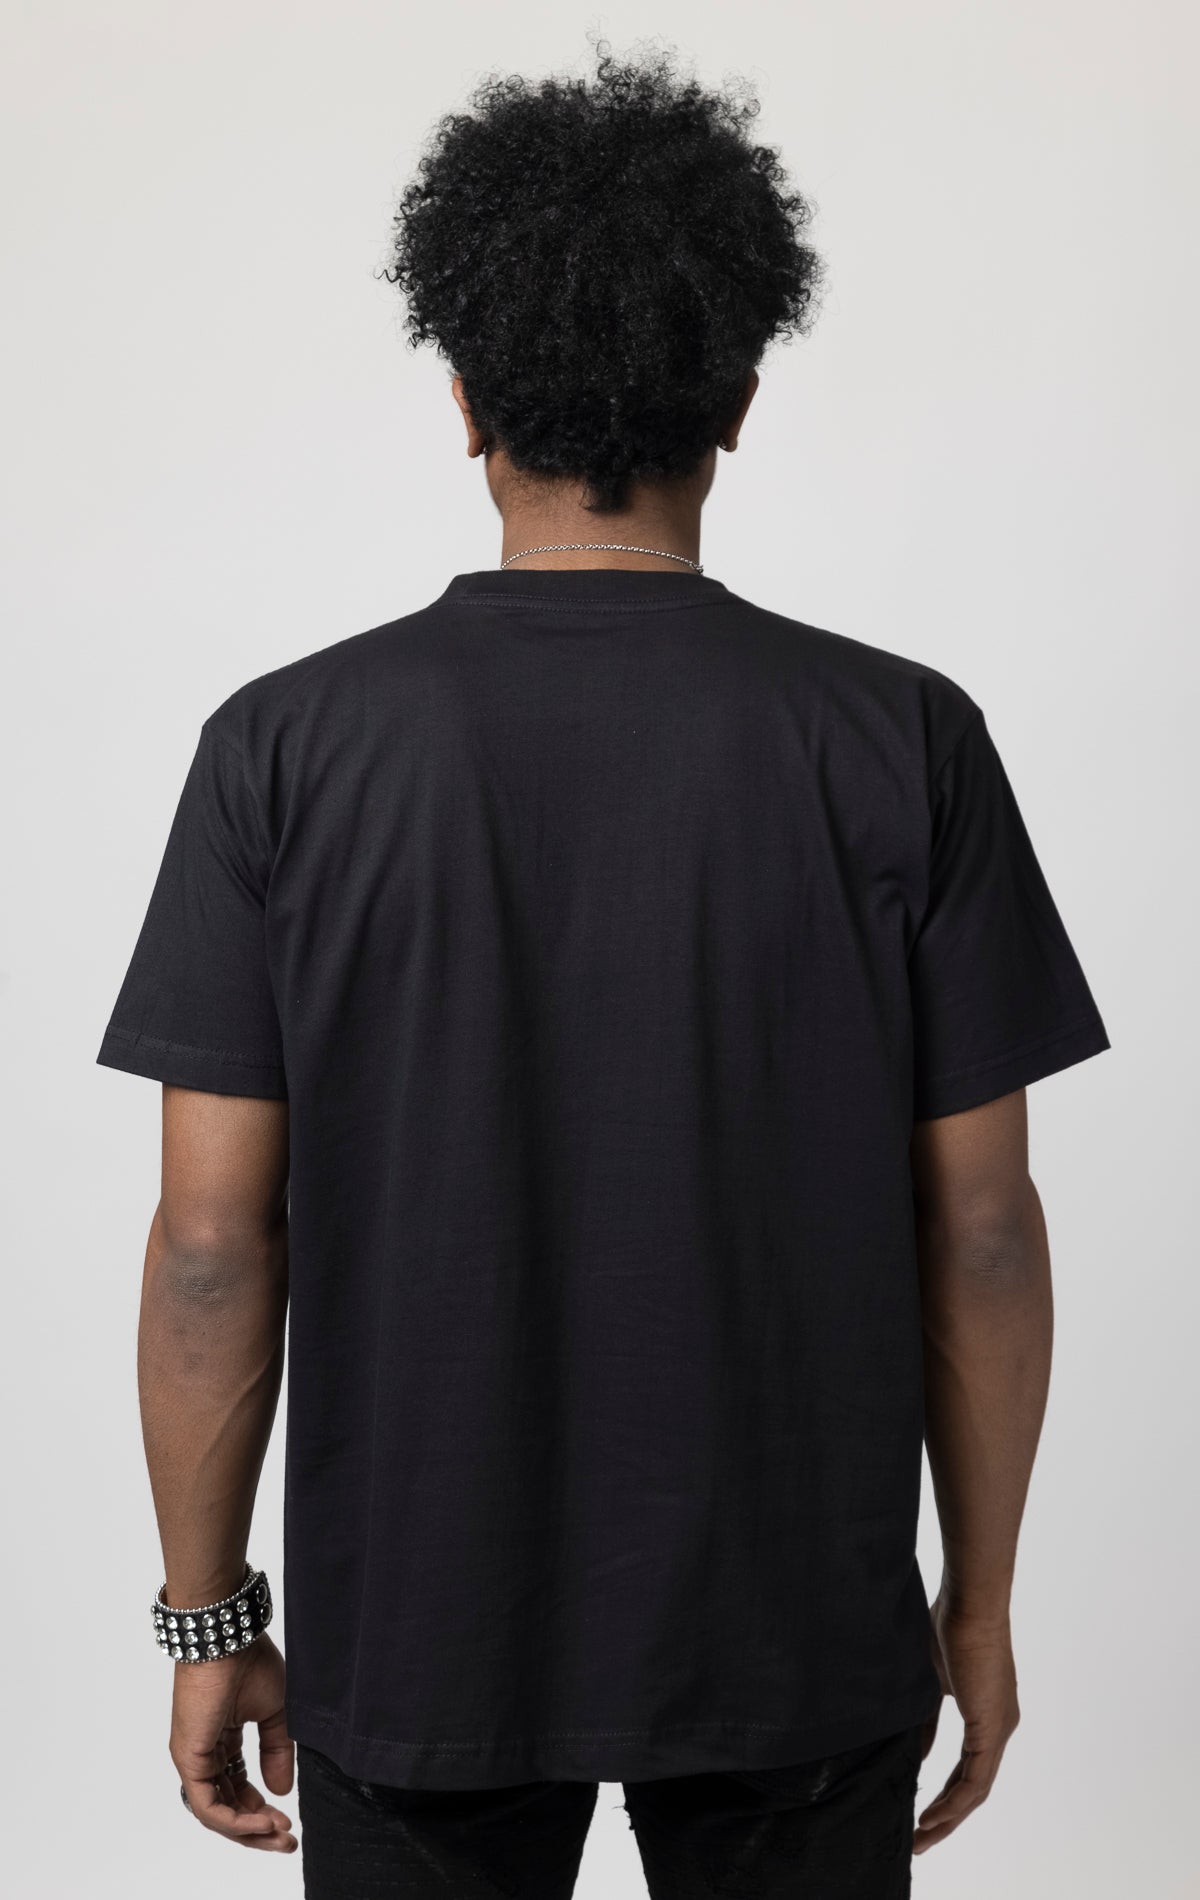 Oversized T-shirt with ribbed crew neck and a printed design on the front.